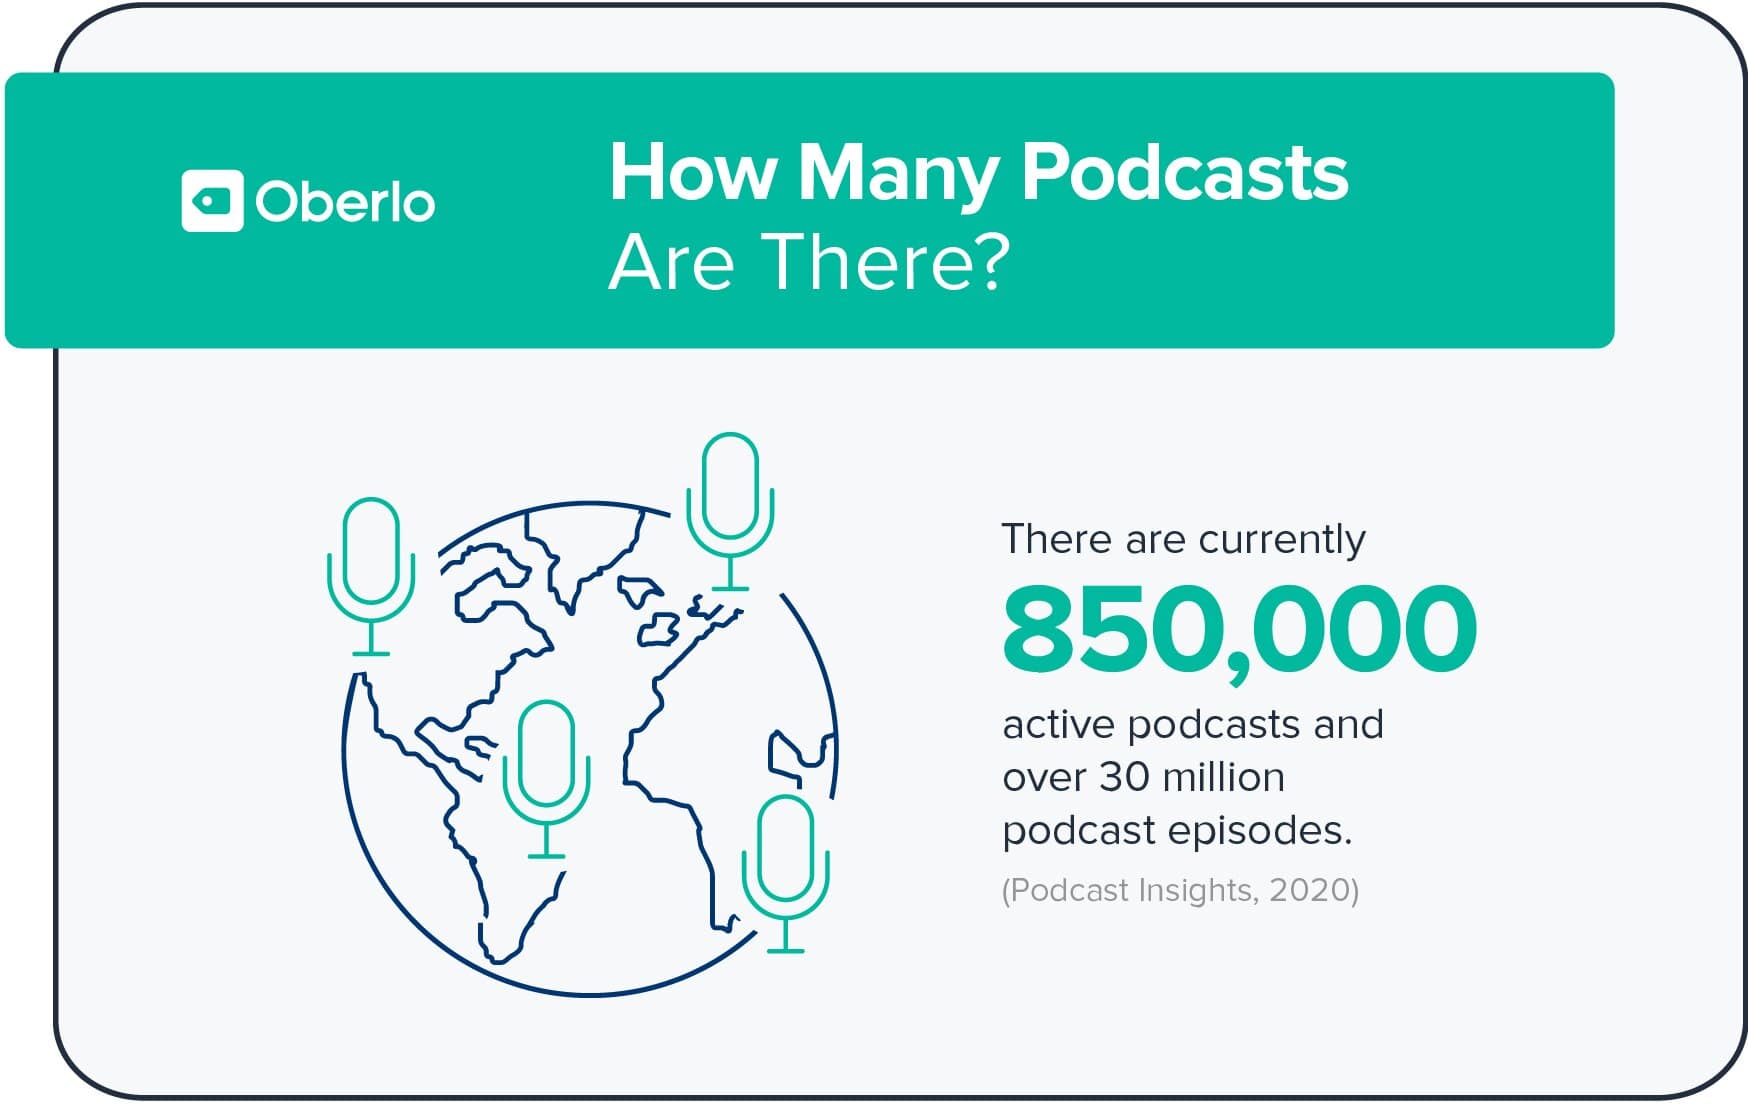 Podcast Global Count 2020 Podcasts Insight 2020